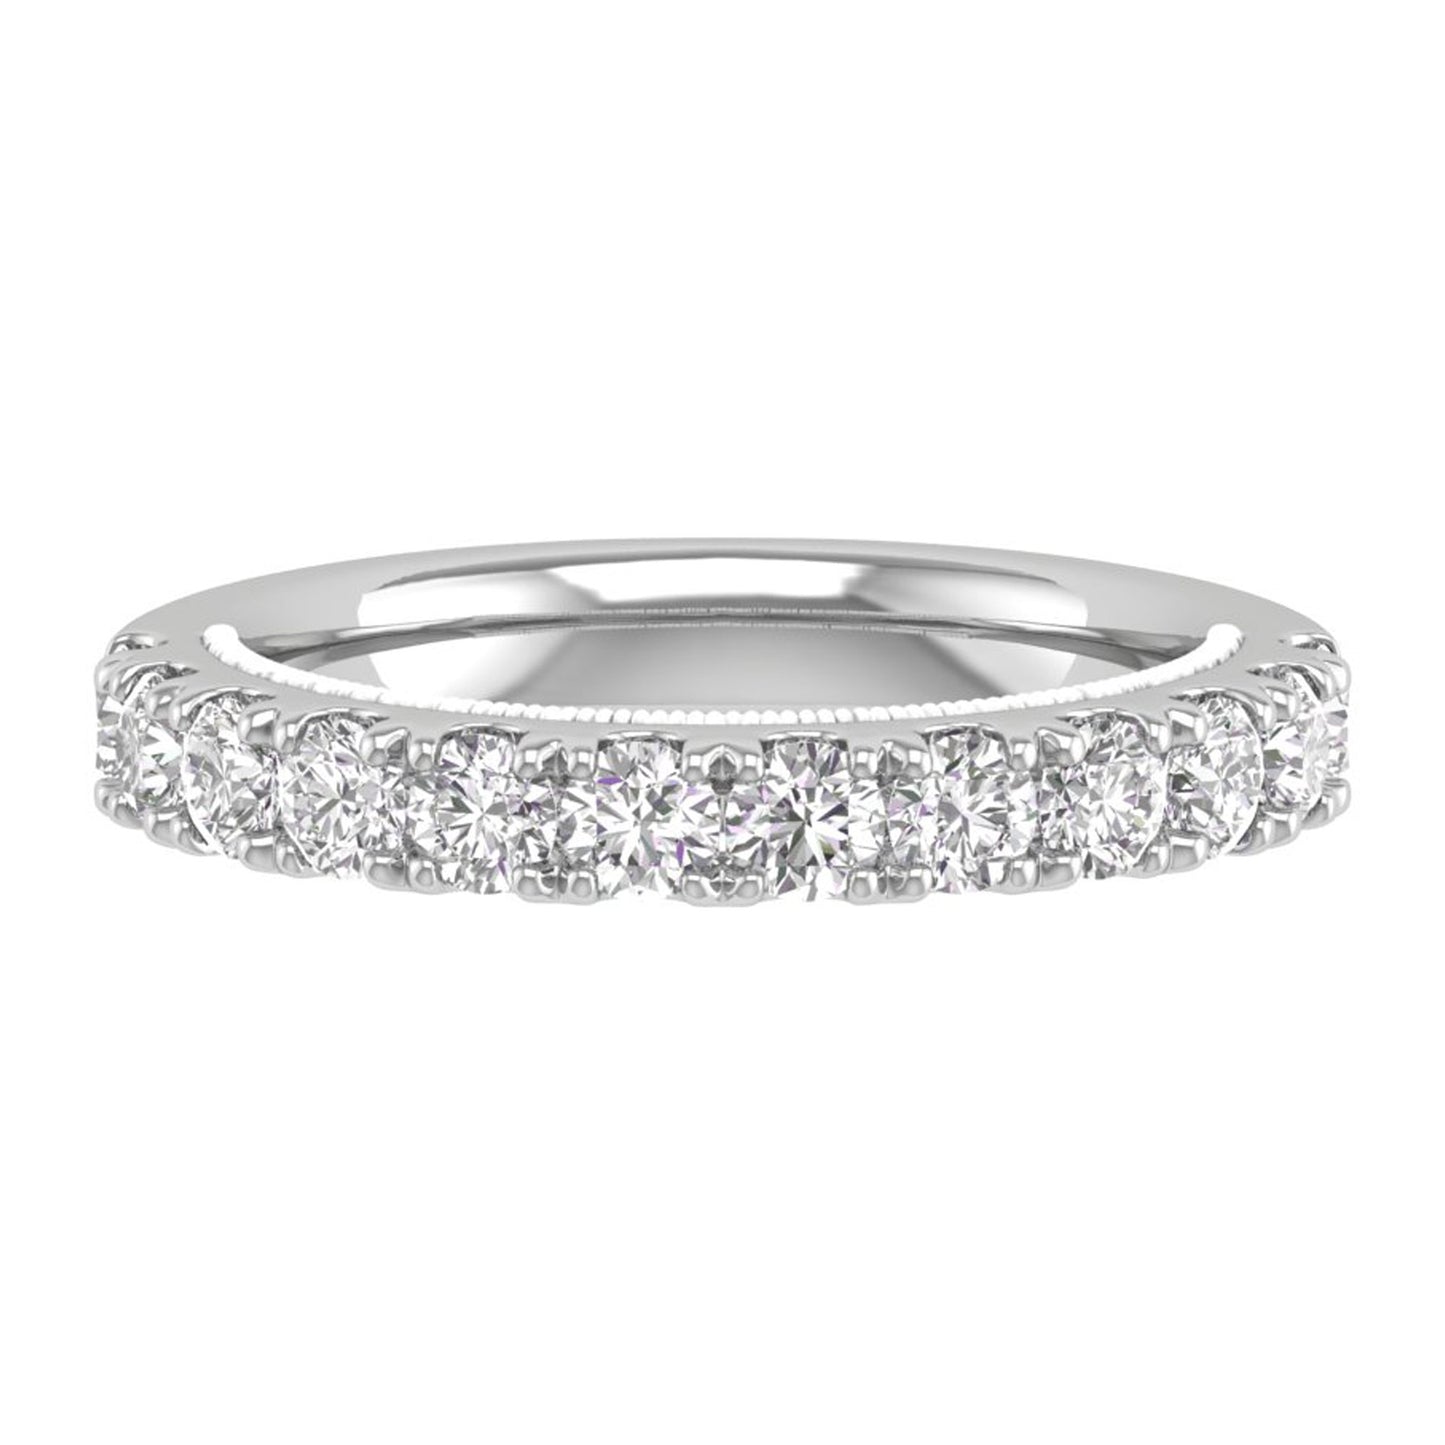 1 CTW COLORLESS FLAWLESS FRENCH PAVE WITH MILGRAIN WEDDING BAND